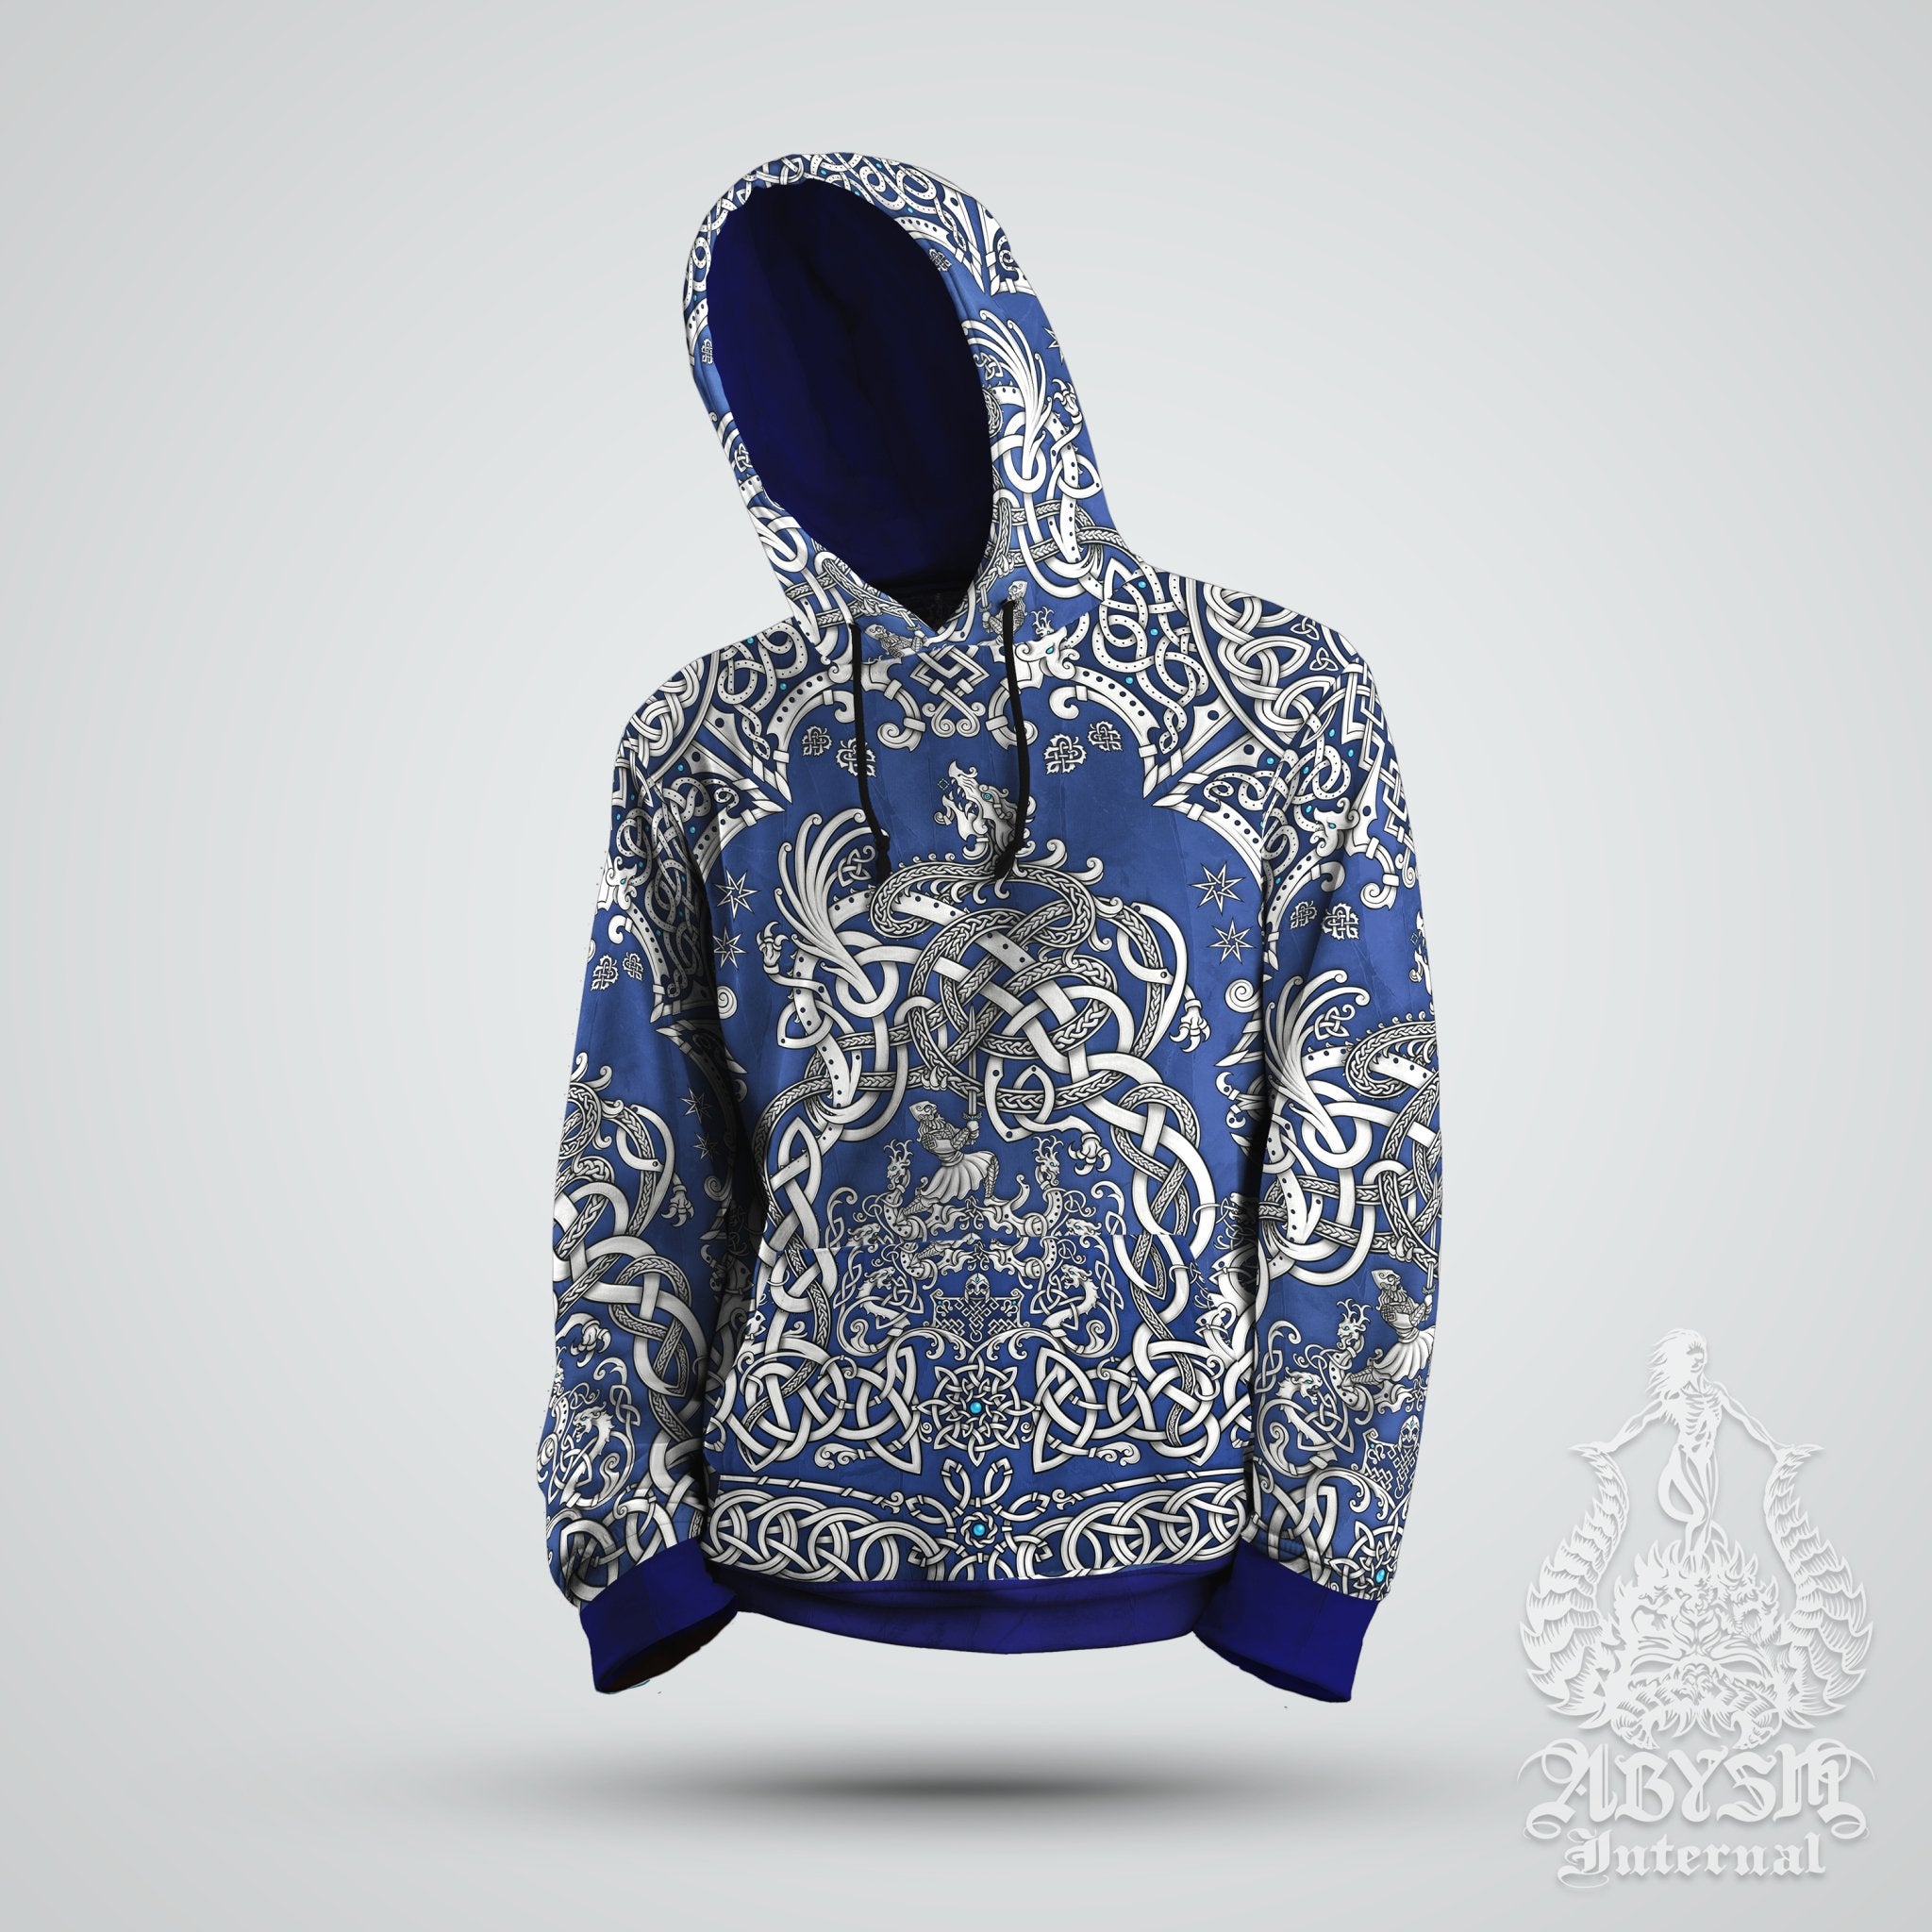 Viking Hoodie, Nordic Art Sweater, Fantasy Street Outfit, White Norse Dragon Streetwear, Alternative Clothing, Unisex - Fafnir, Blue, Red and Black, 3 Colors - Abysm Internal